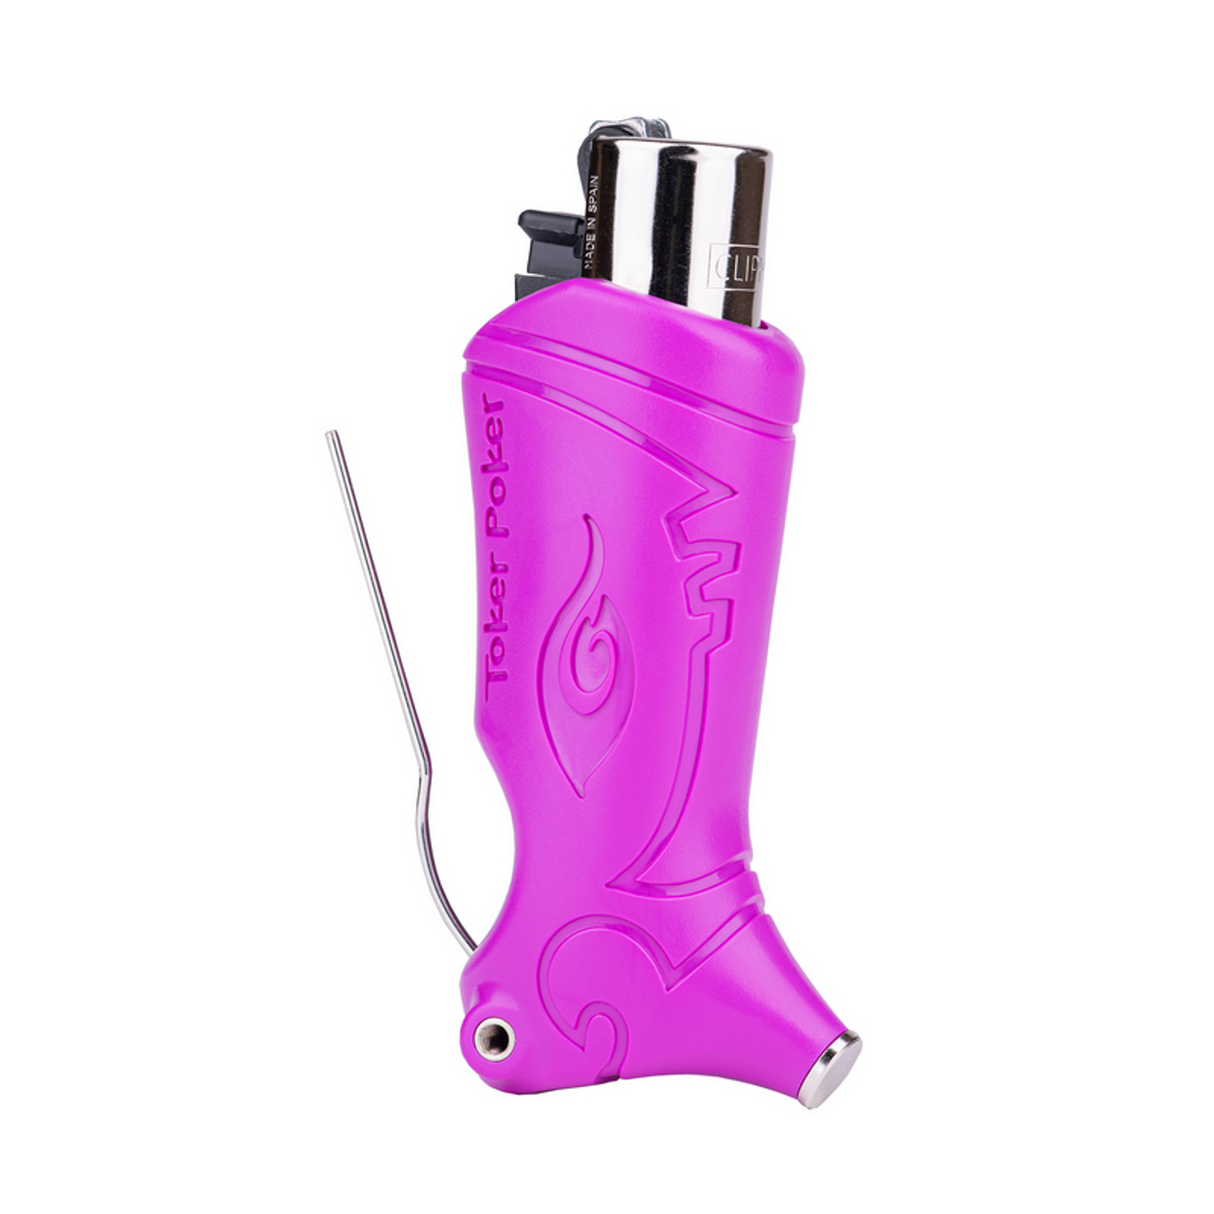 Toker Poker Clipper in vibrant pink with poker and tamper tools, front view on a white background